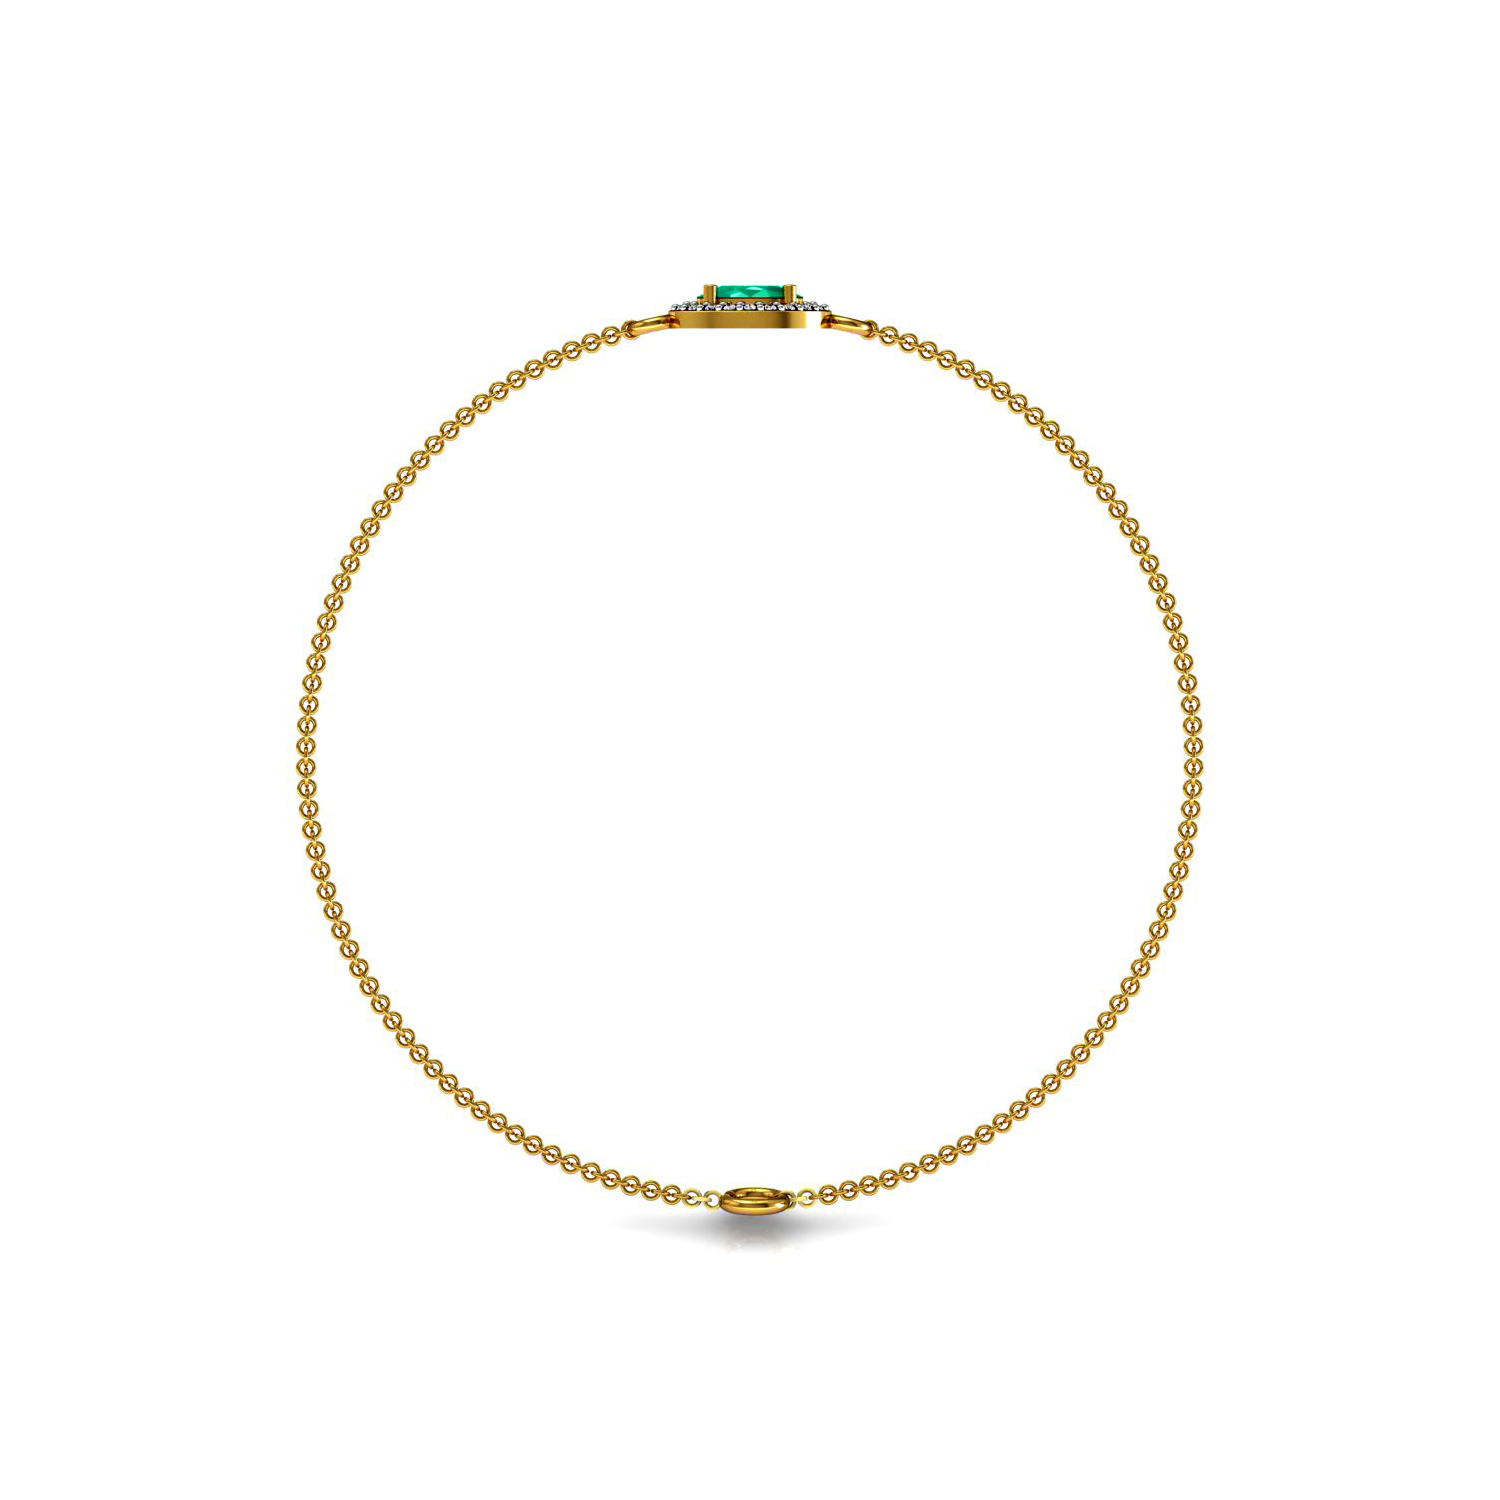 Solid gold emerald real diamond chain bracelet